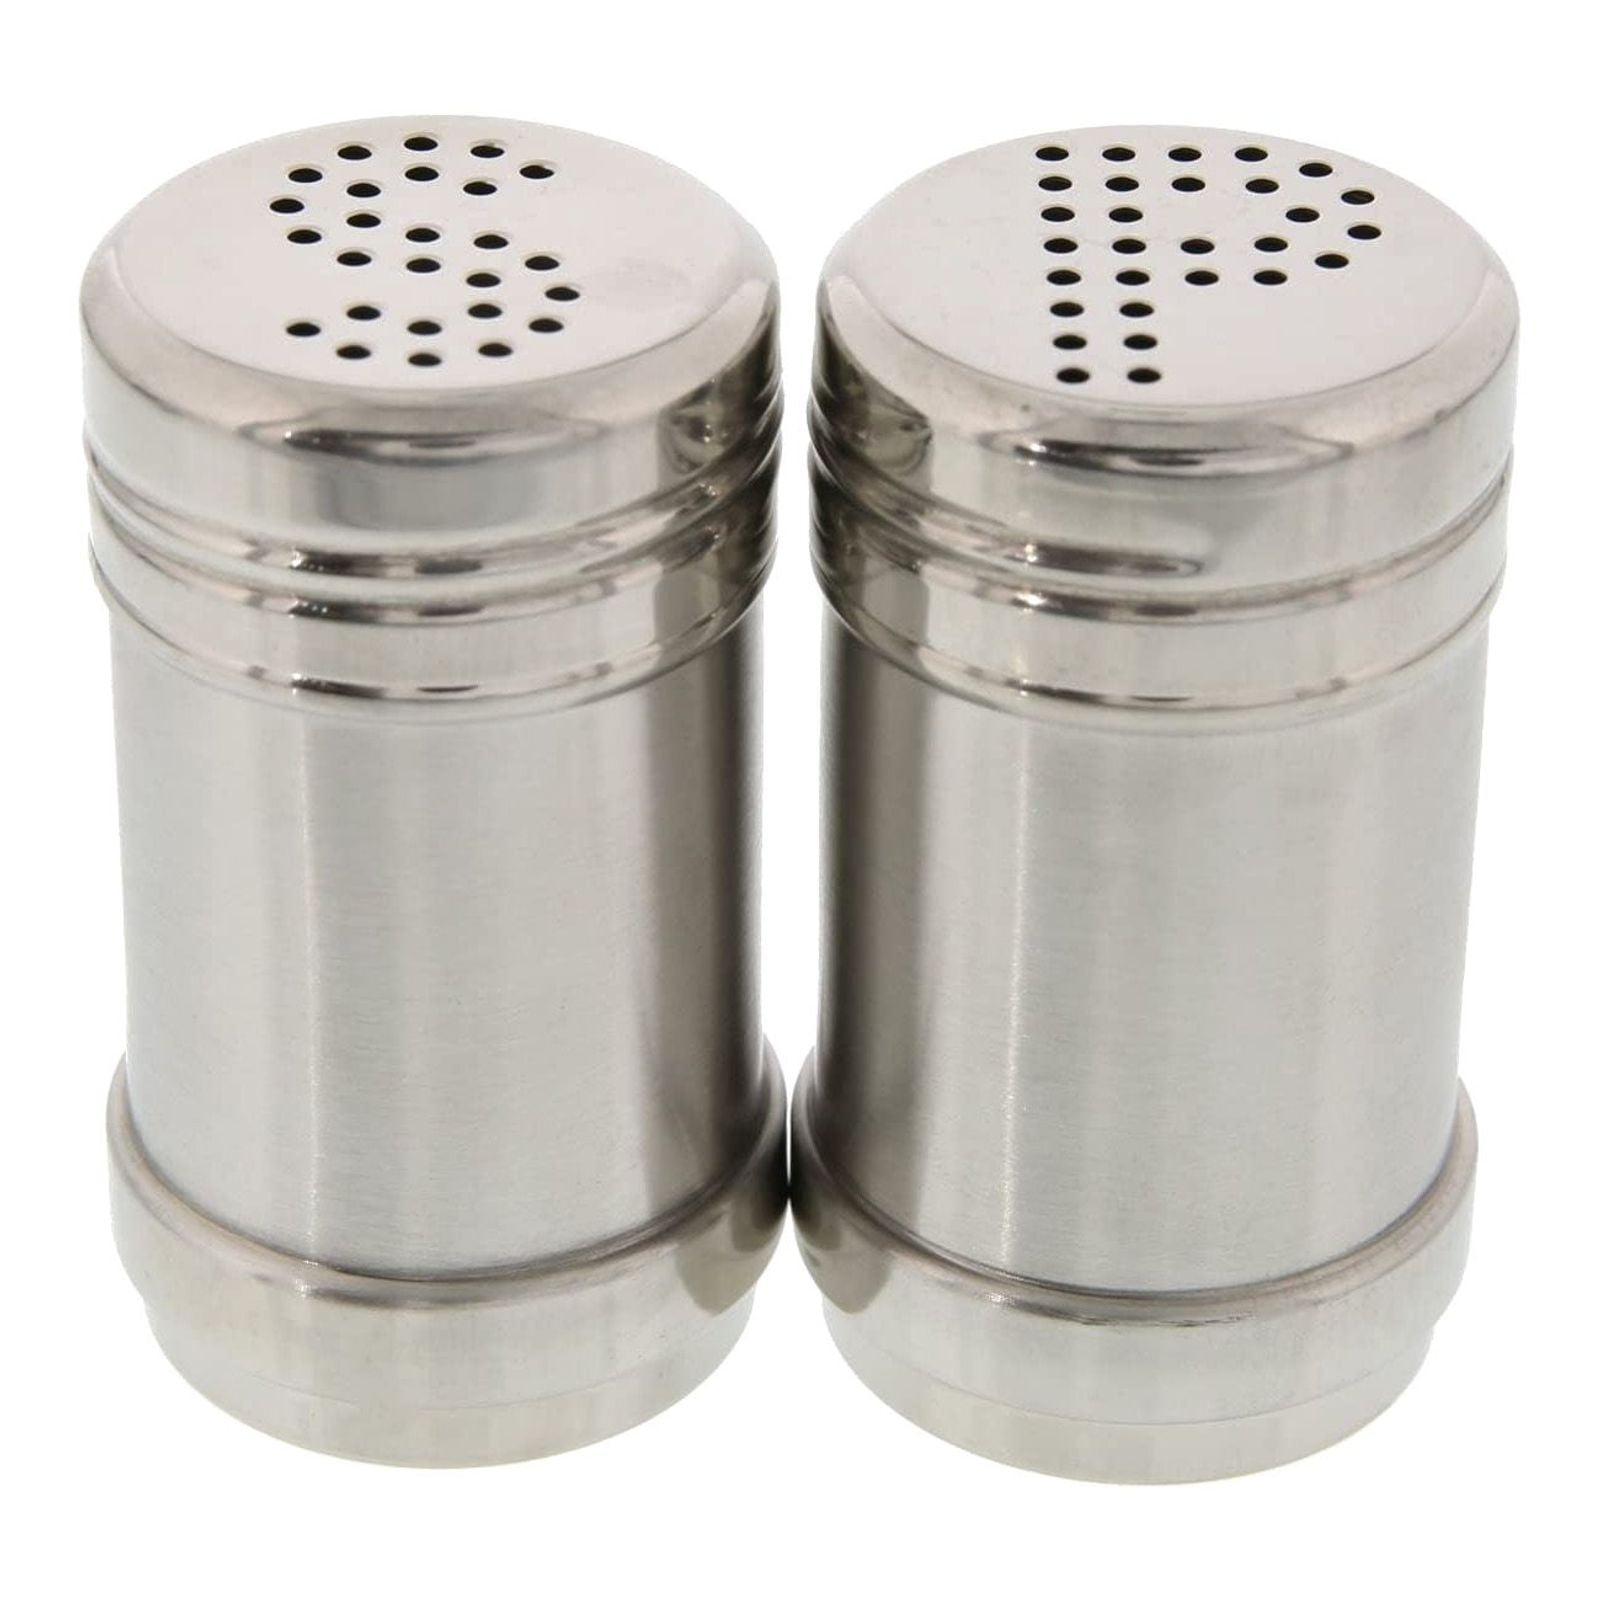 Salt and Pepper Shakers by Cooking Concepts 1 Set